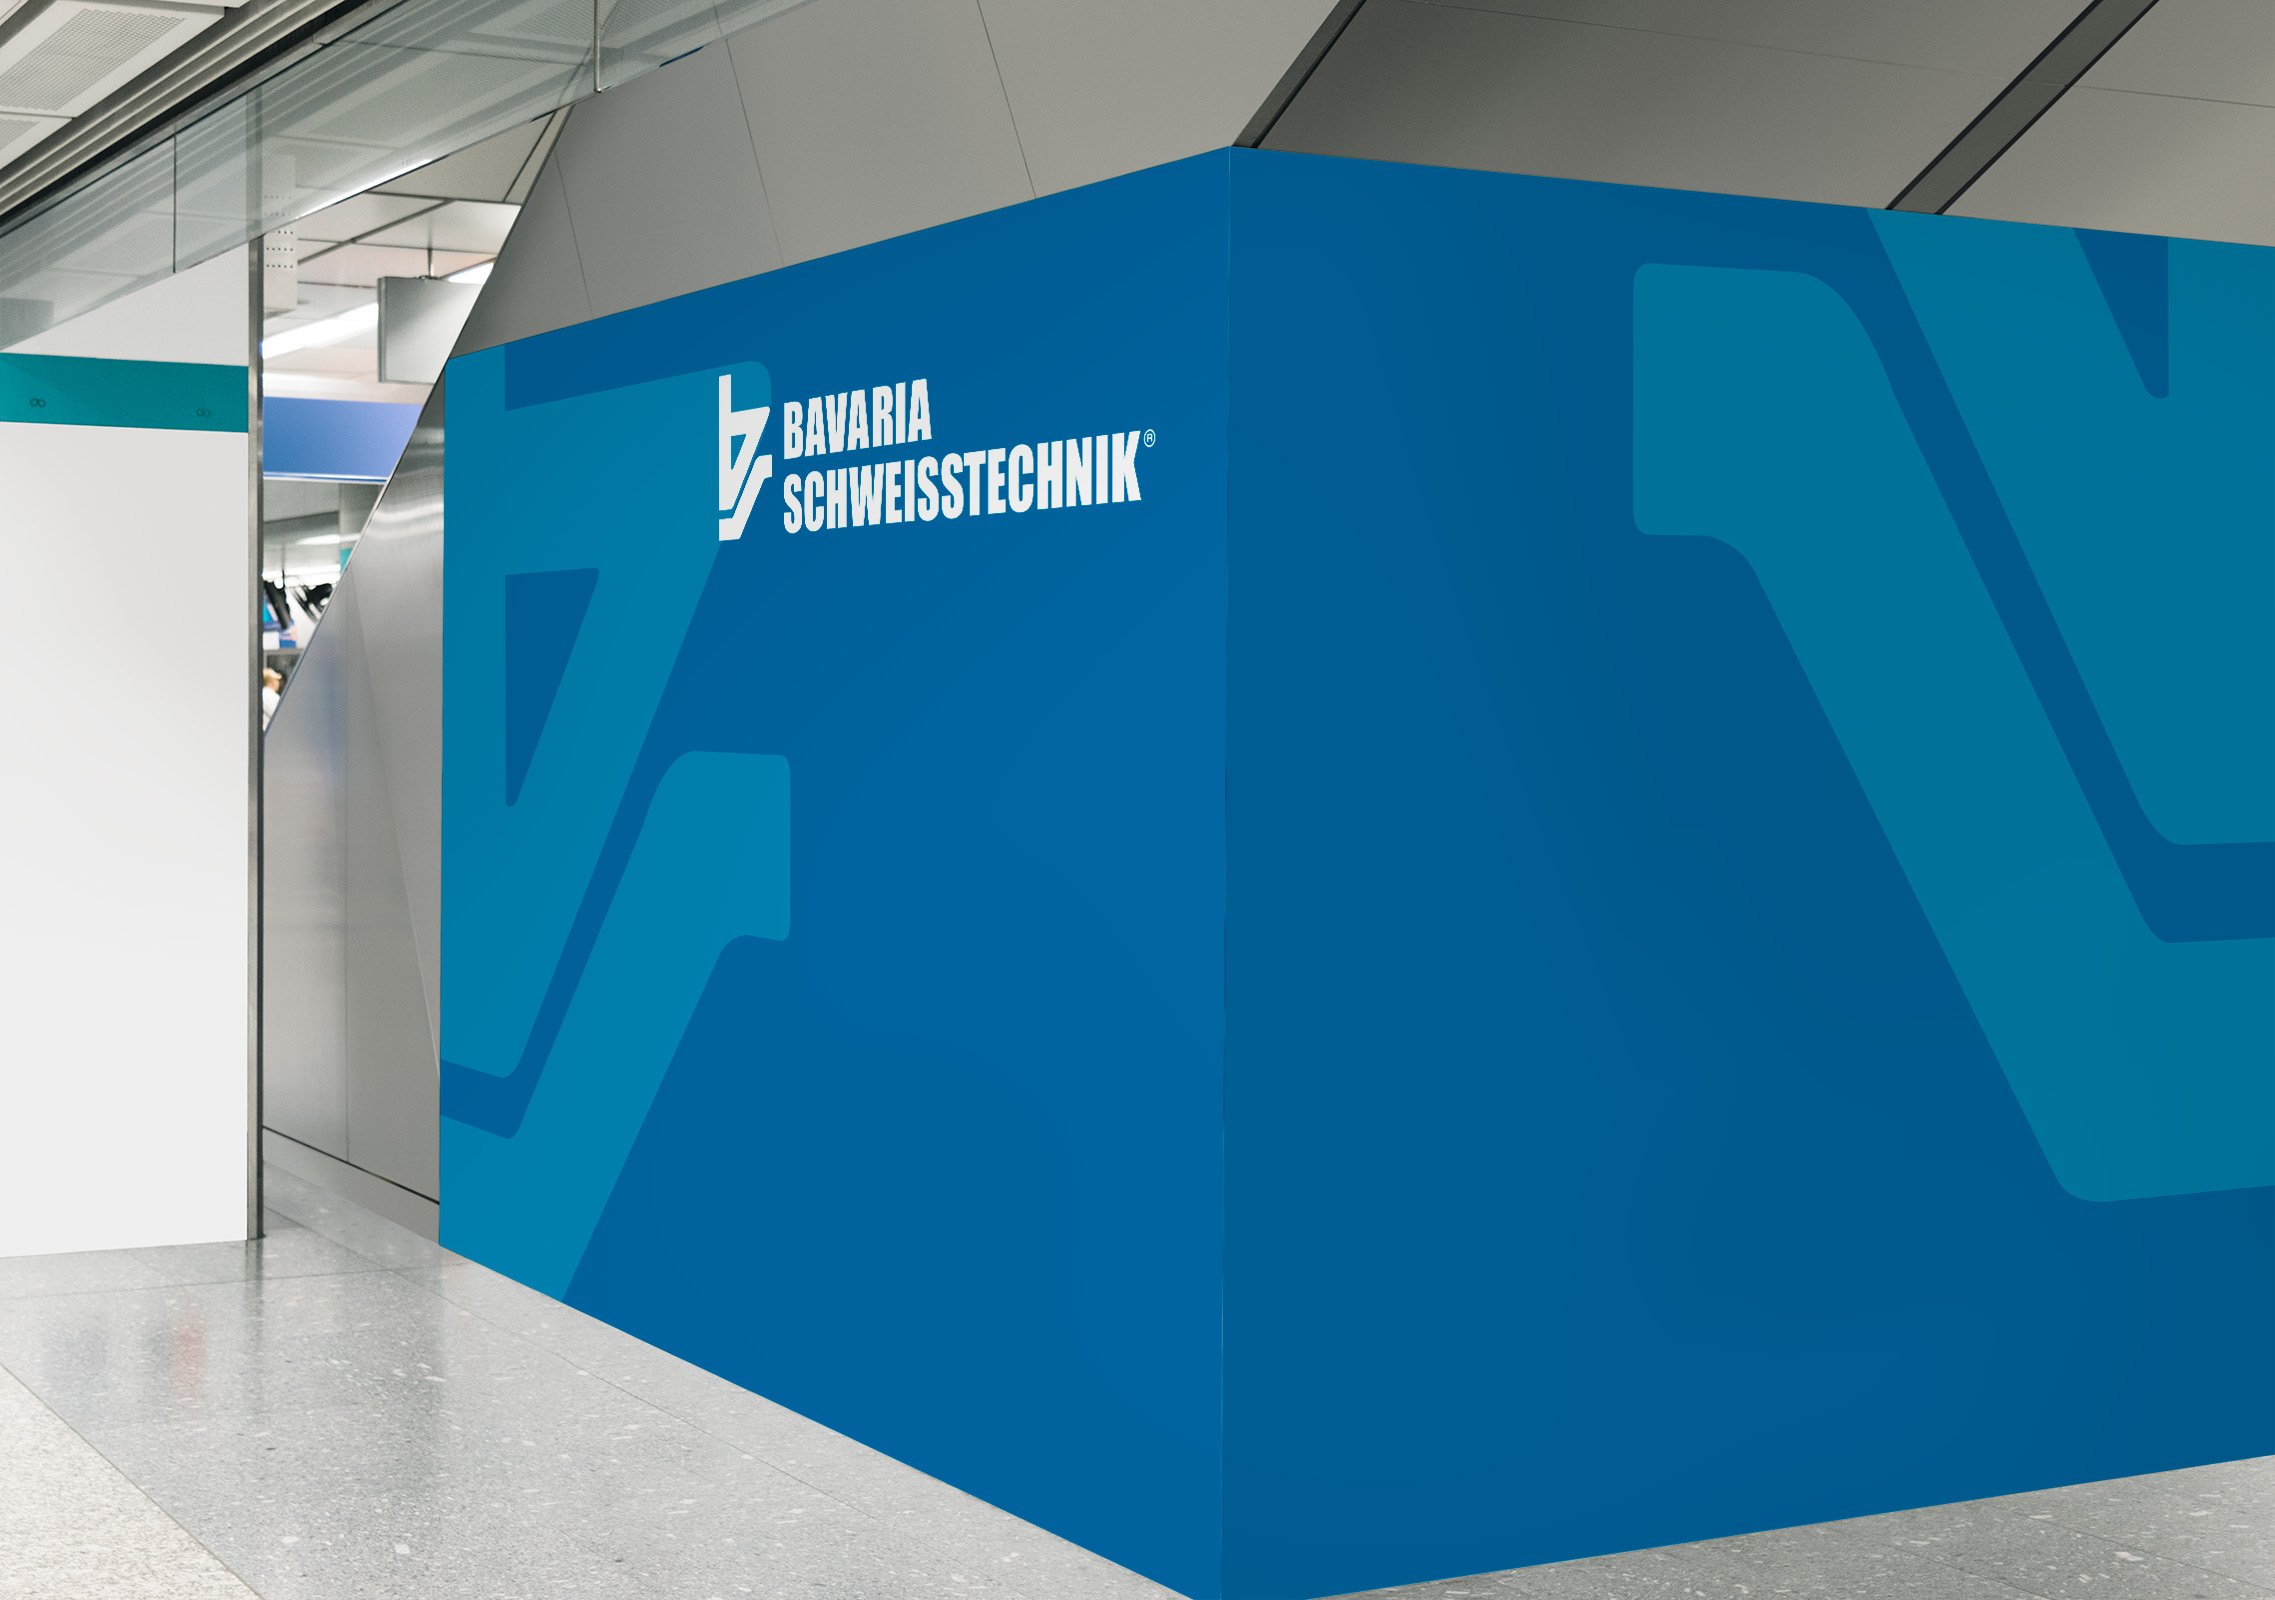 An exhibition stand in the client's corporate design, which we implemented as an advertising agency.